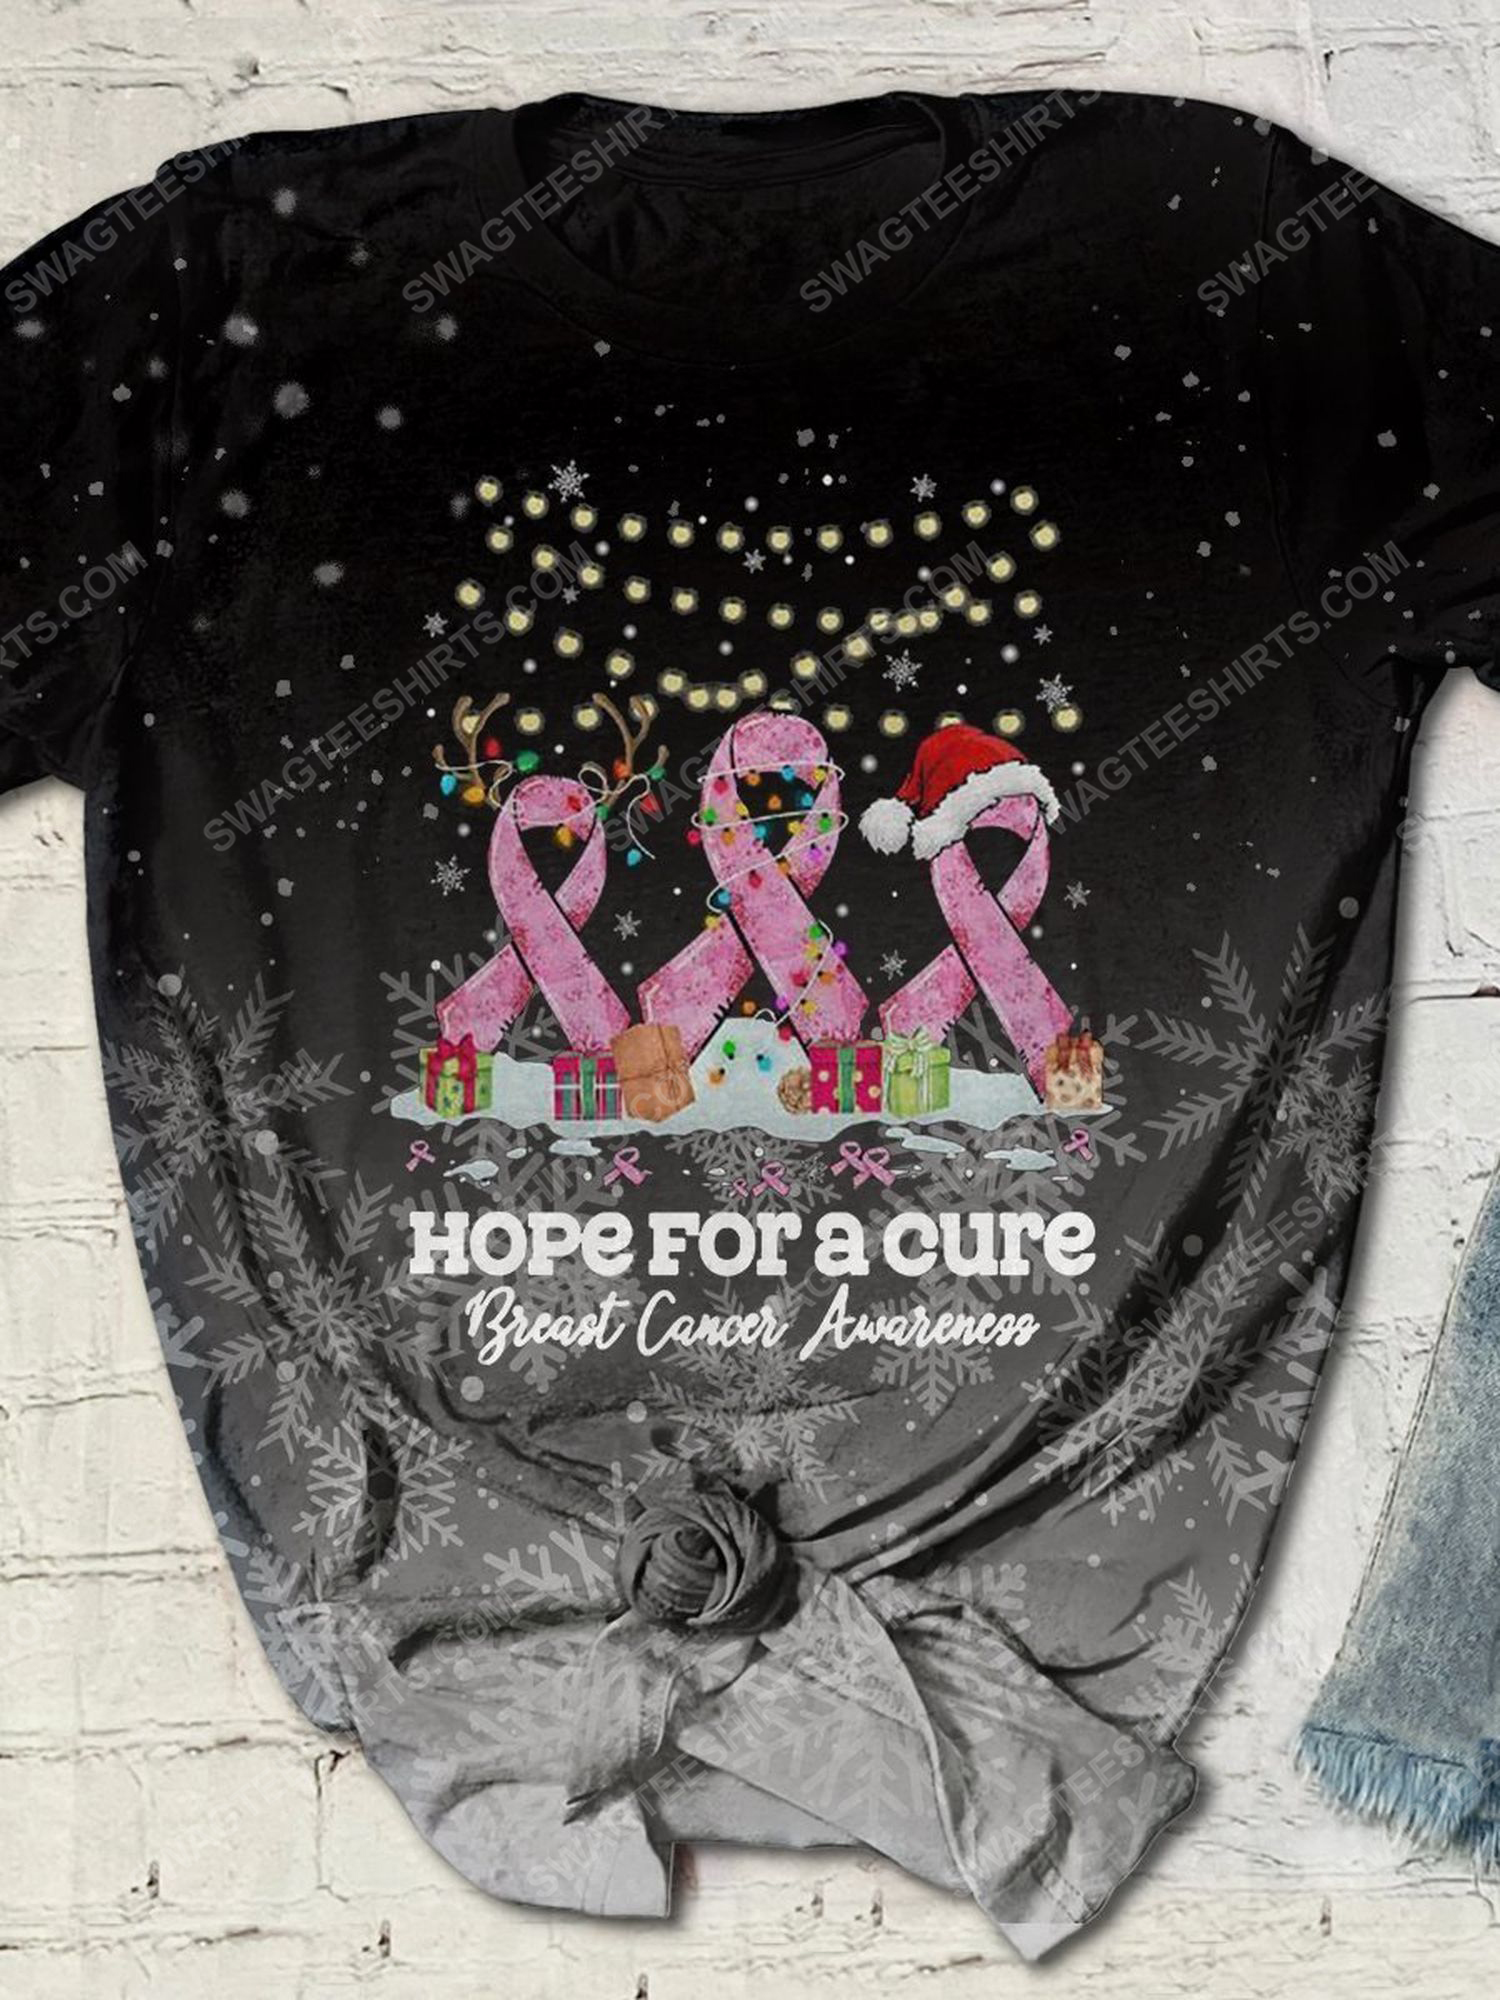 Breast cancer awareness hope for a cure full print shirt 1 - Copy